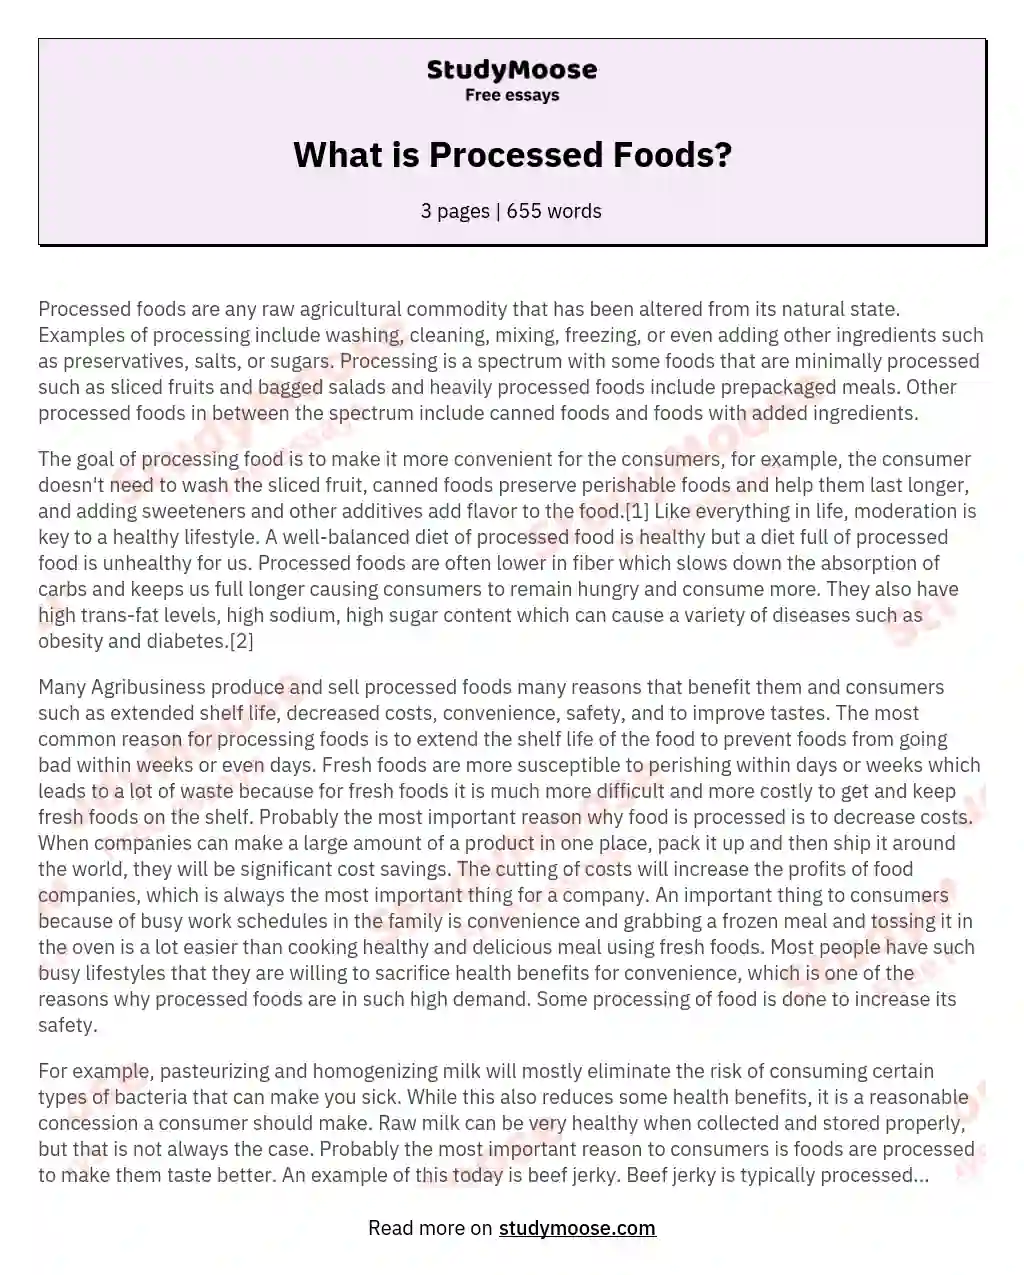 What is Processed Foods?